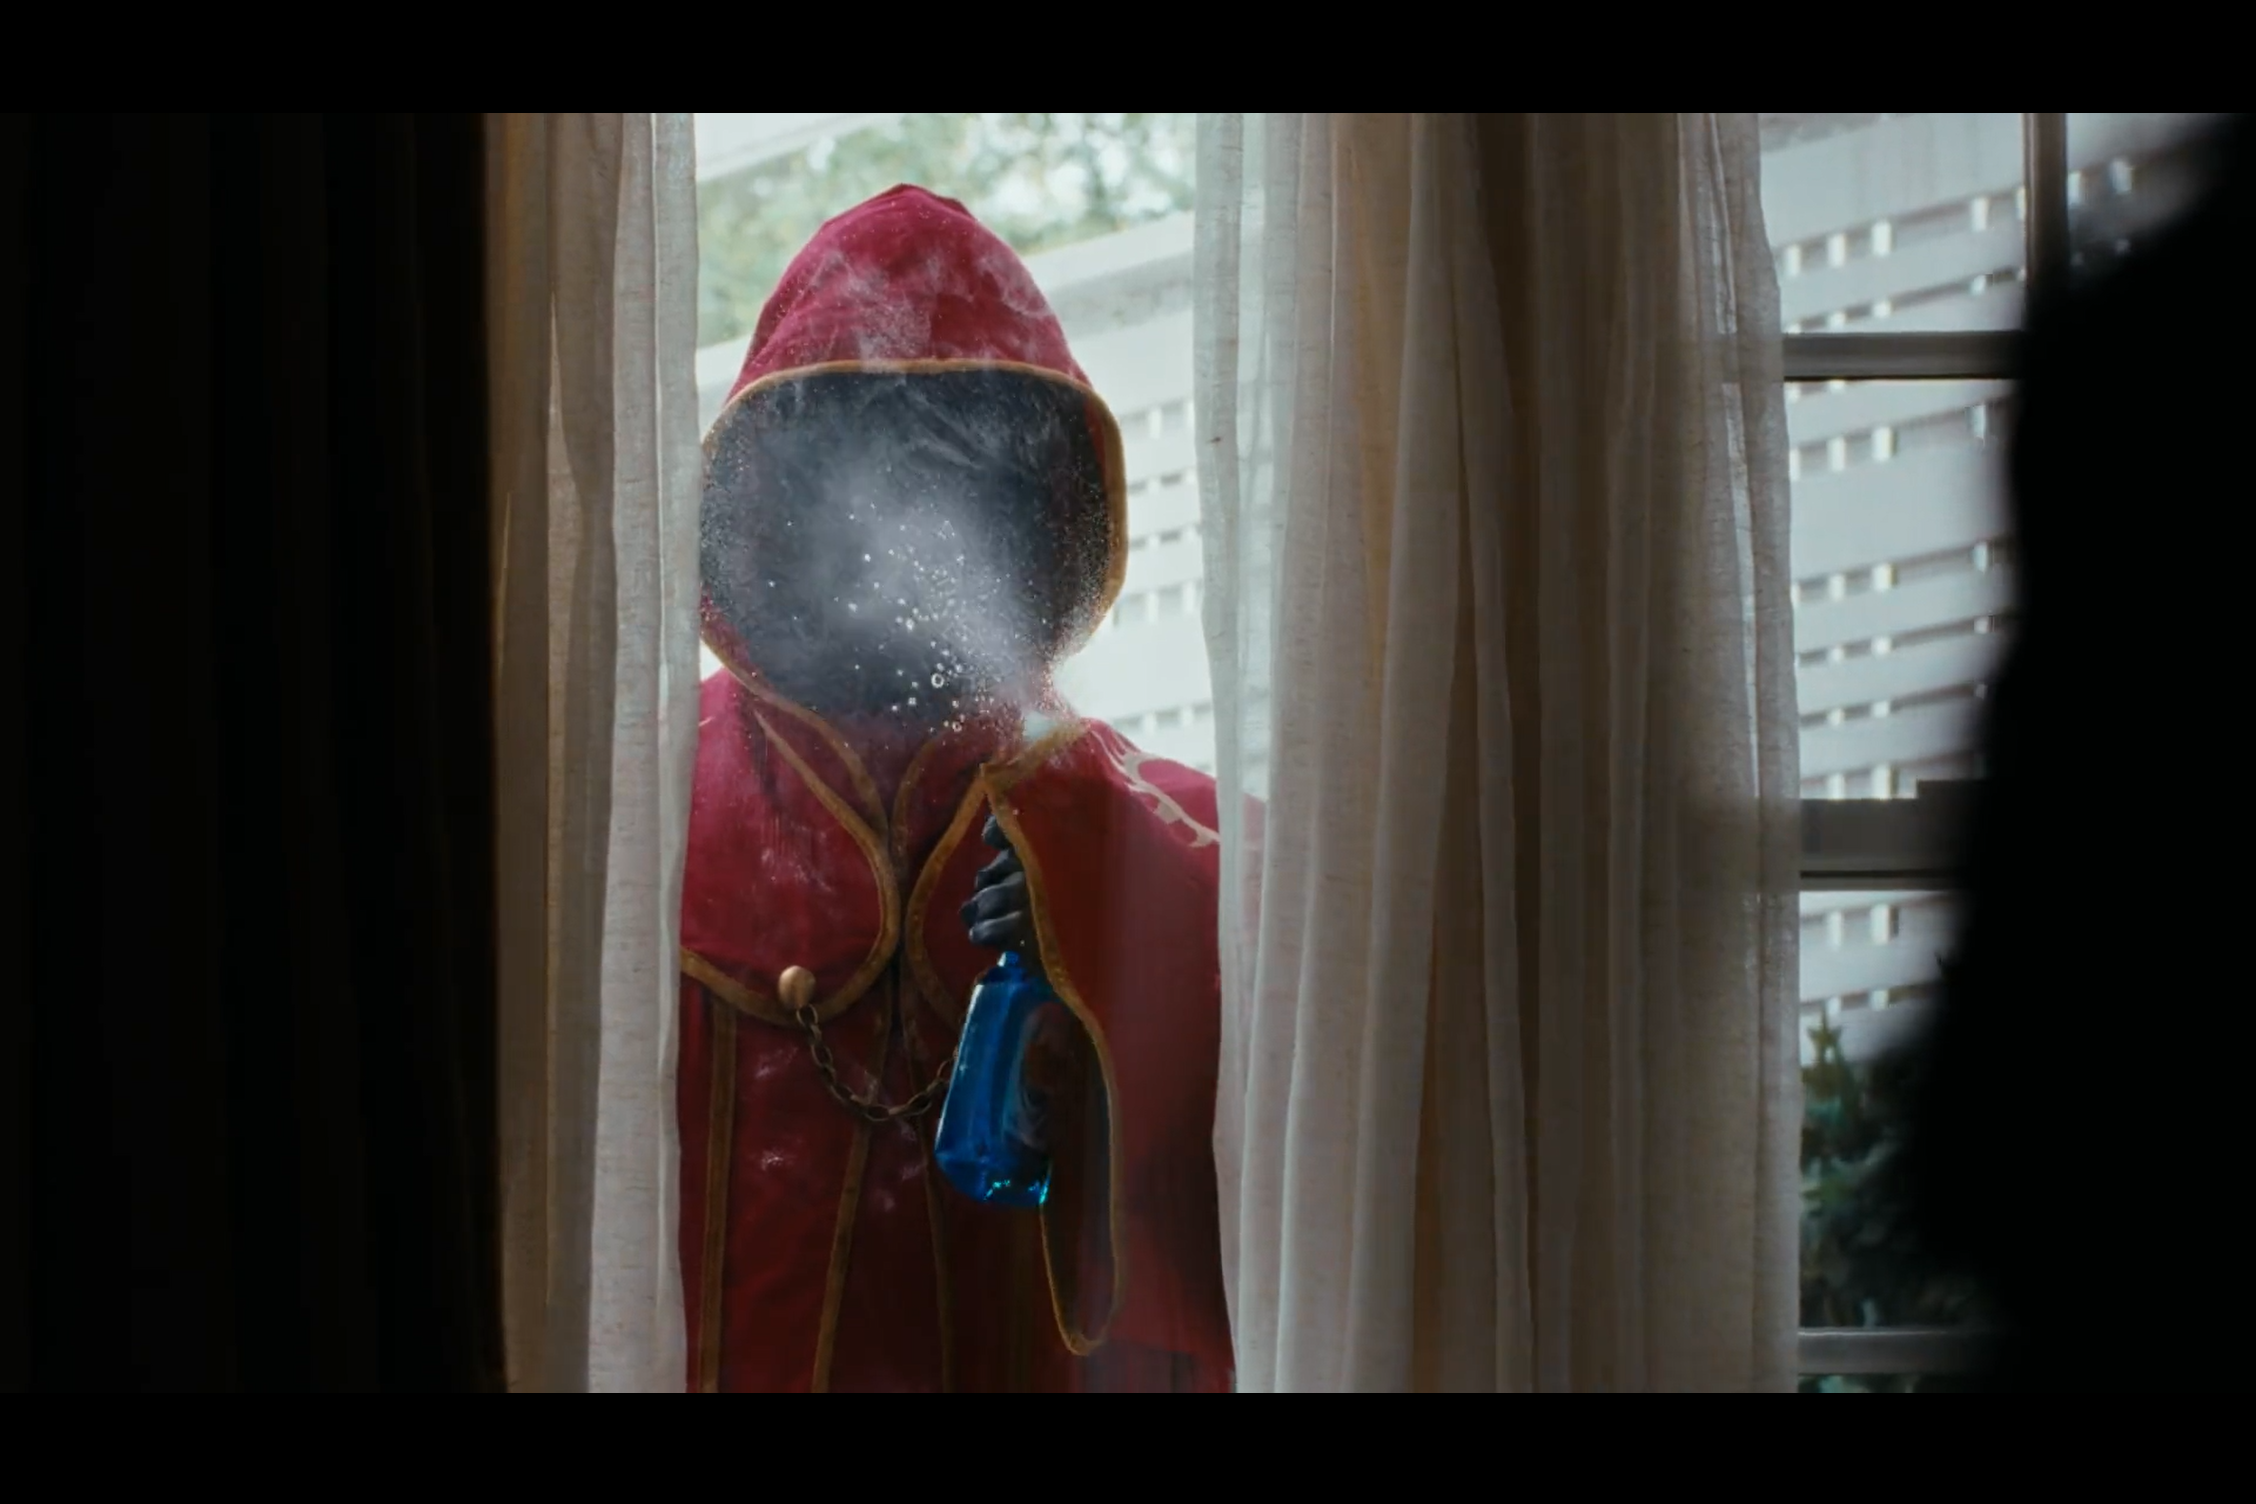 A person wearing a red robe washing a window from outside a house